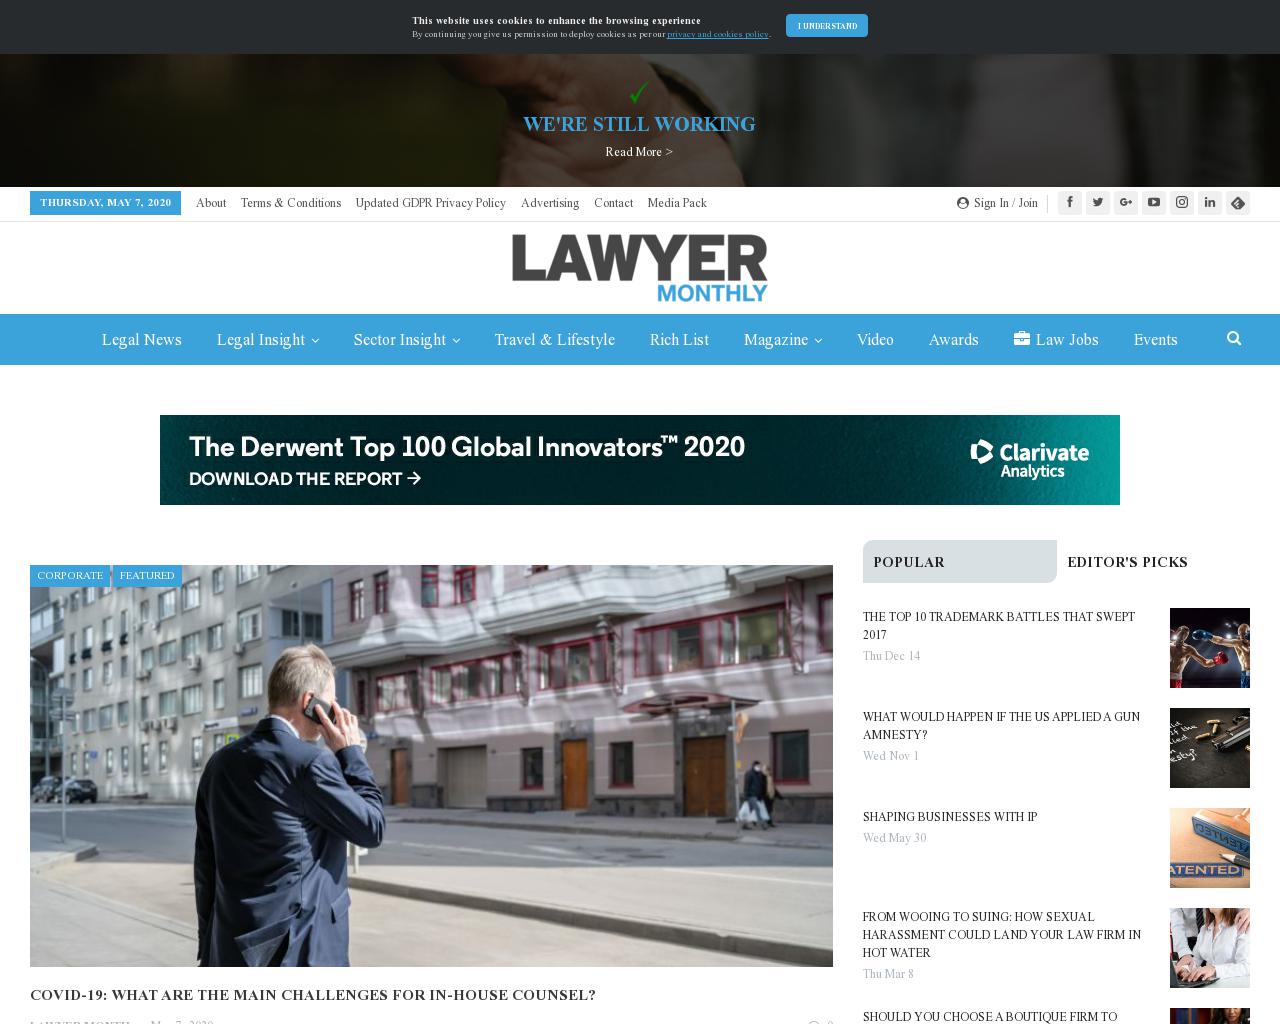 lawyer-monthly.com